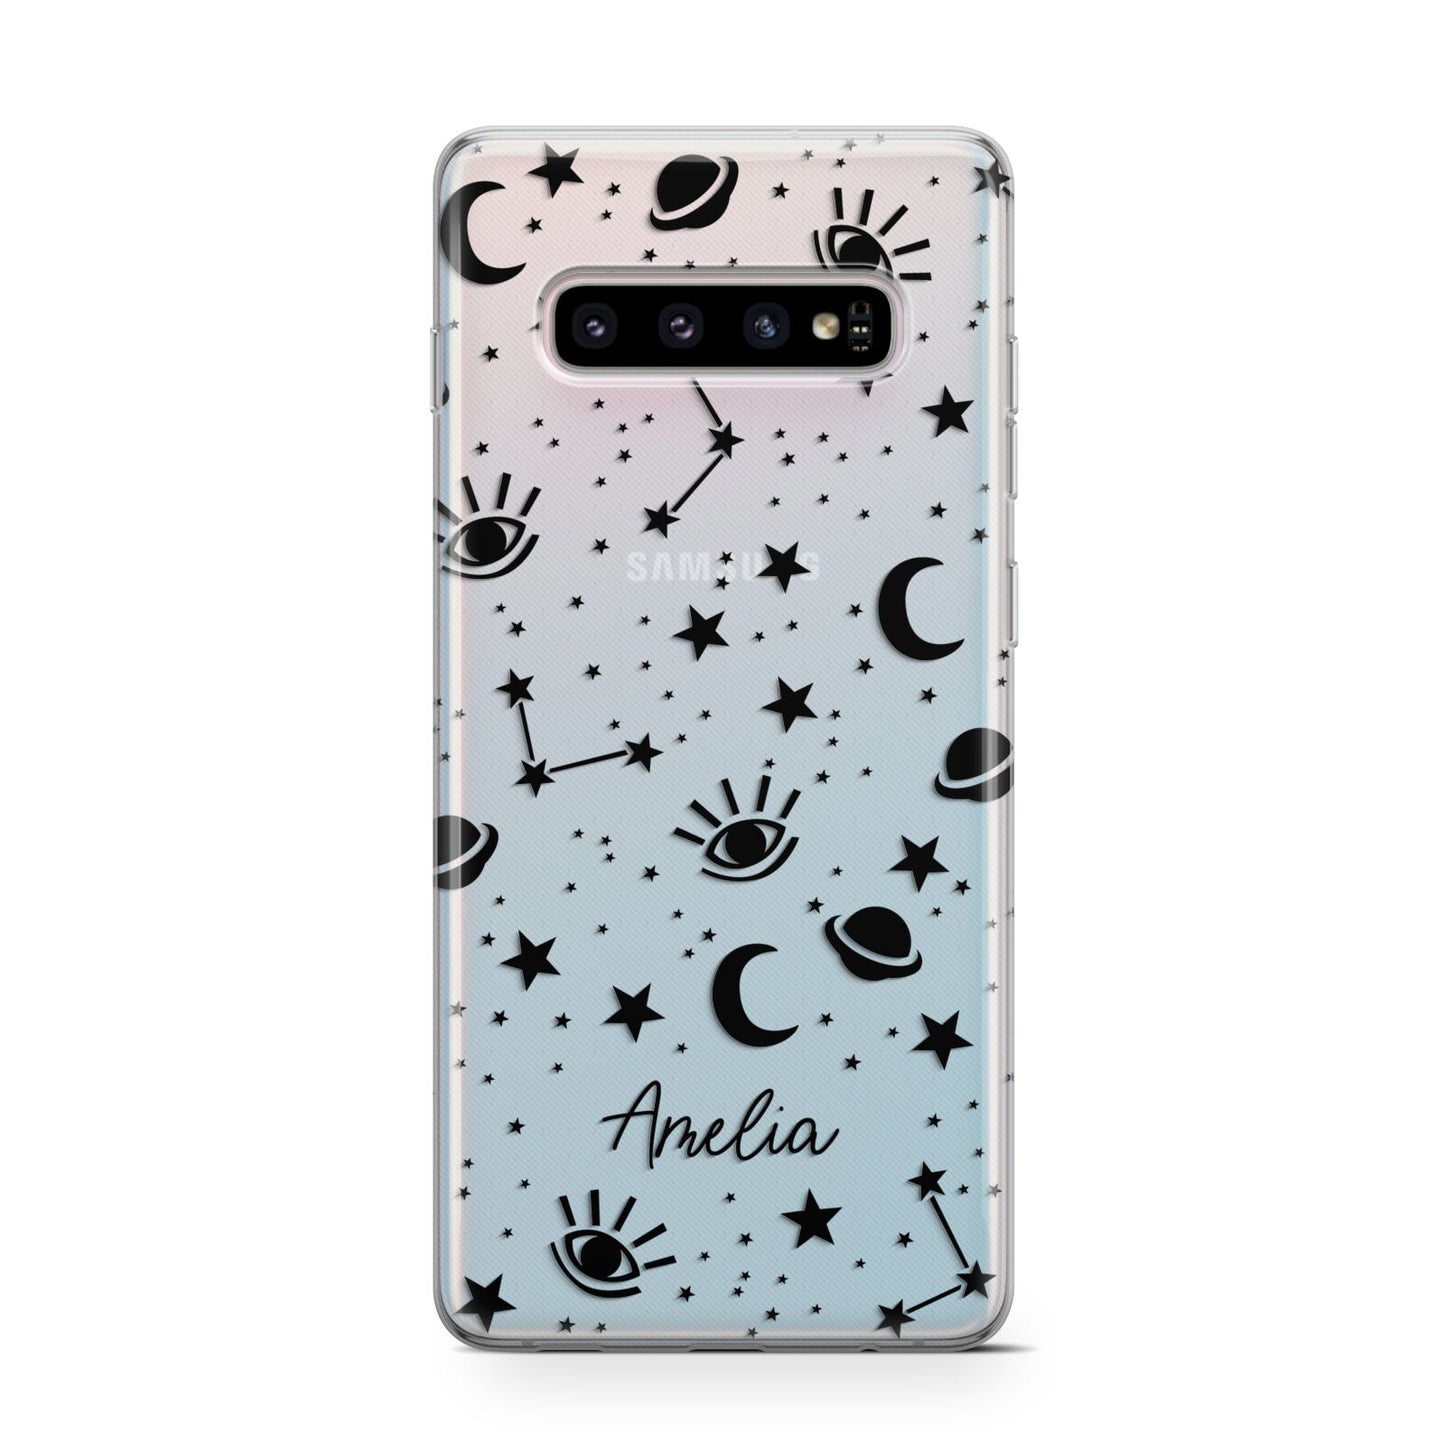 Monochrome Zodiac Constellations with Name Samsung Galaxy S10 Case